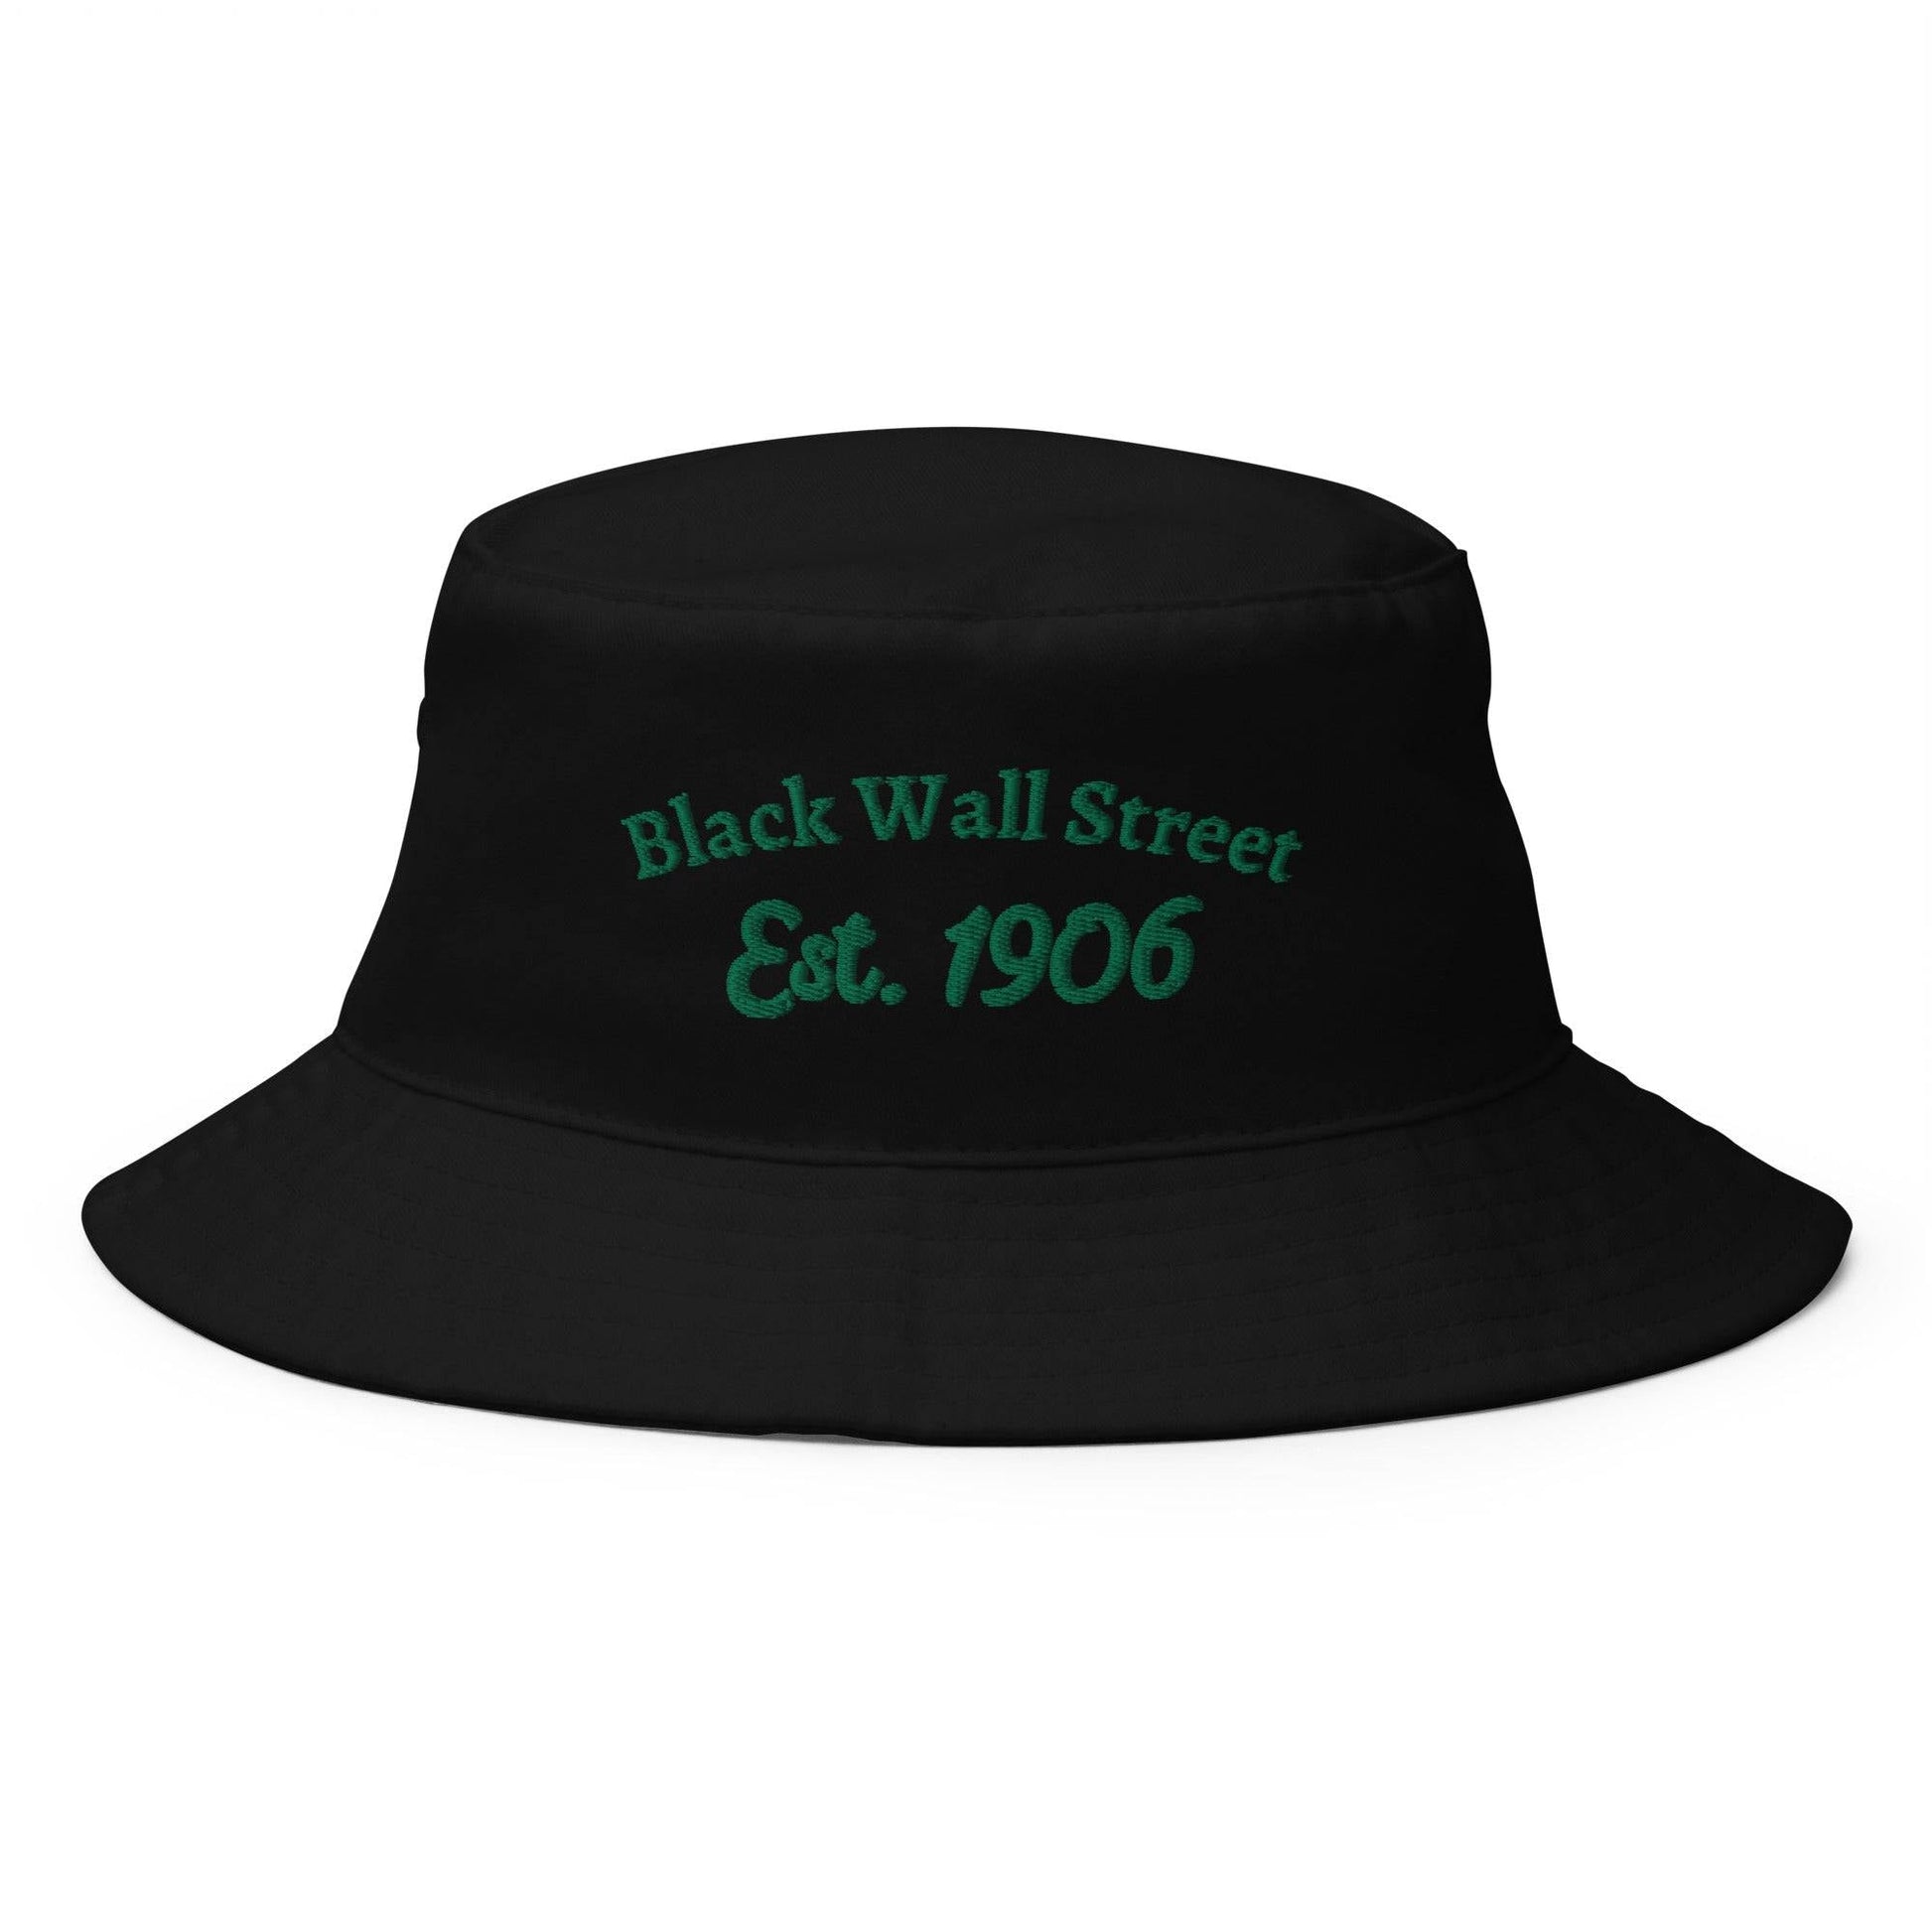 black bucket hat with black wall street est 1906 embroider on it